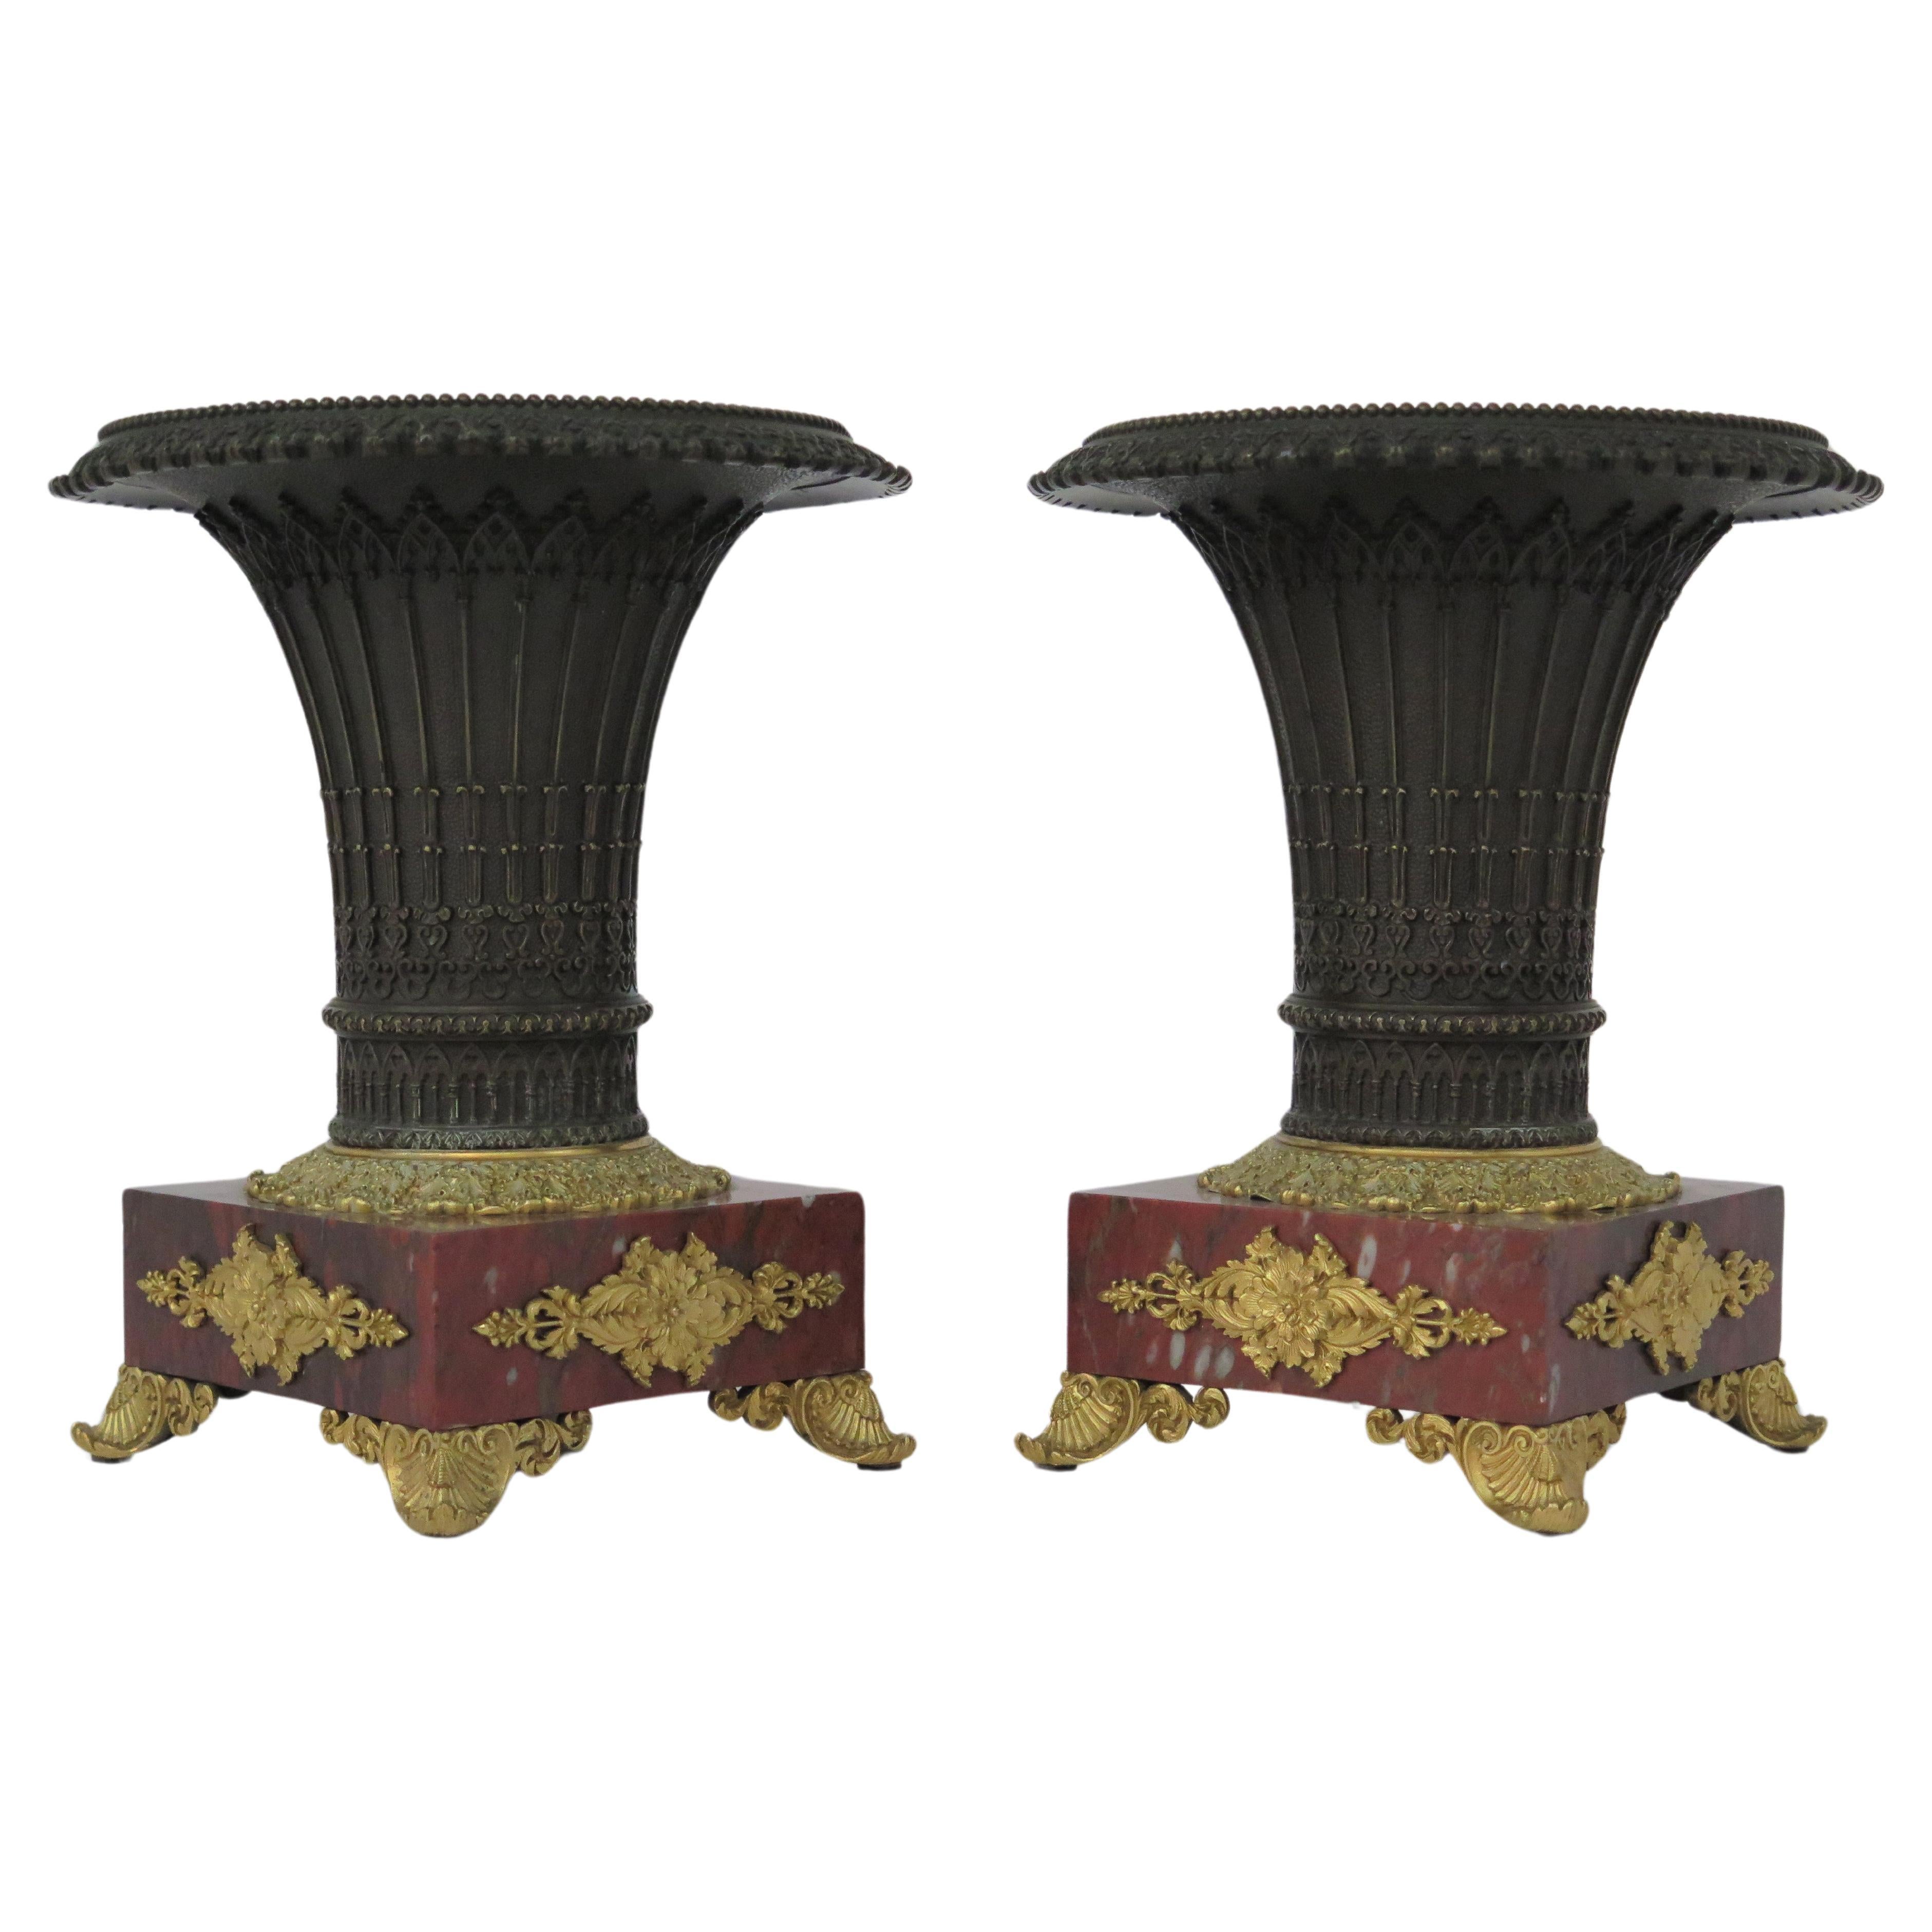 Pair of French Restoration Bronze Urns with Rouge Gritte Marble and Ormolu